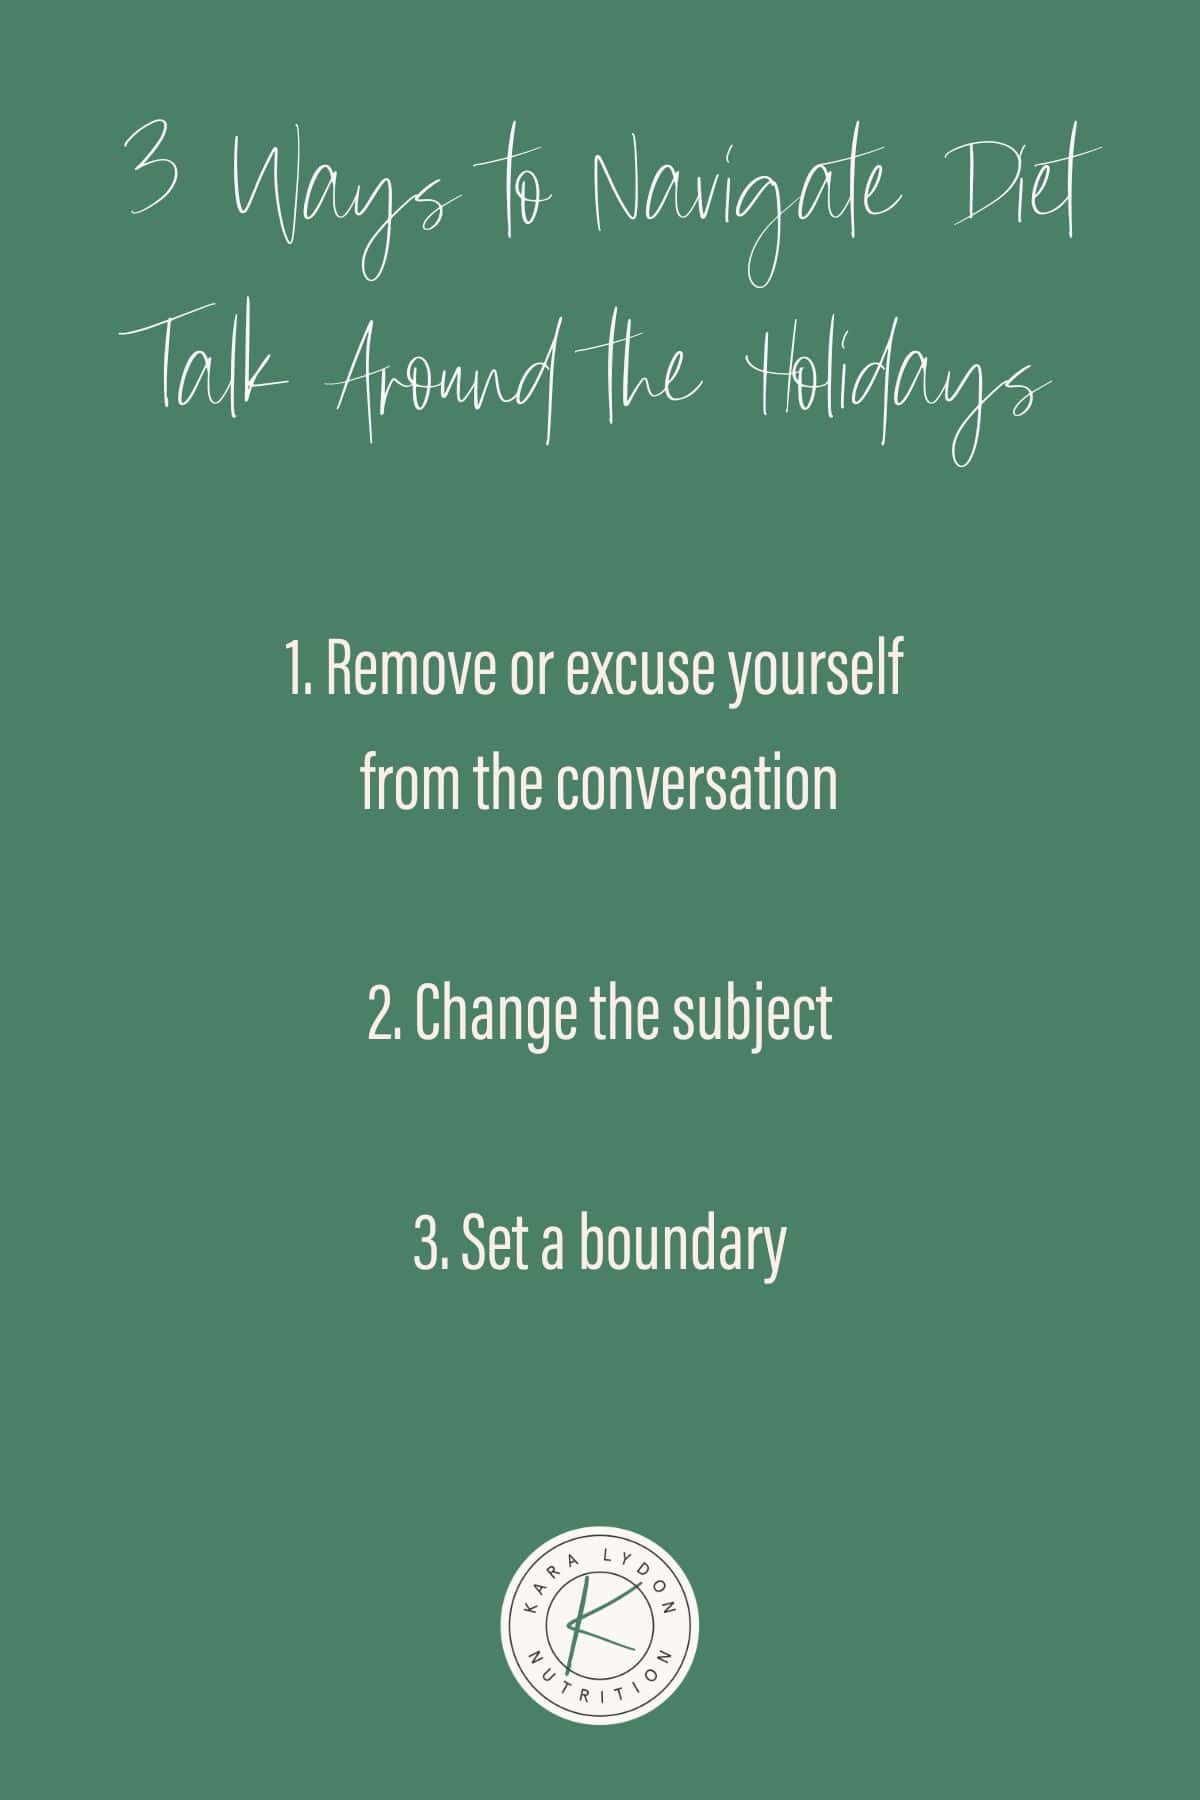 Graphic list of three ways to navigate the holiday diet talk